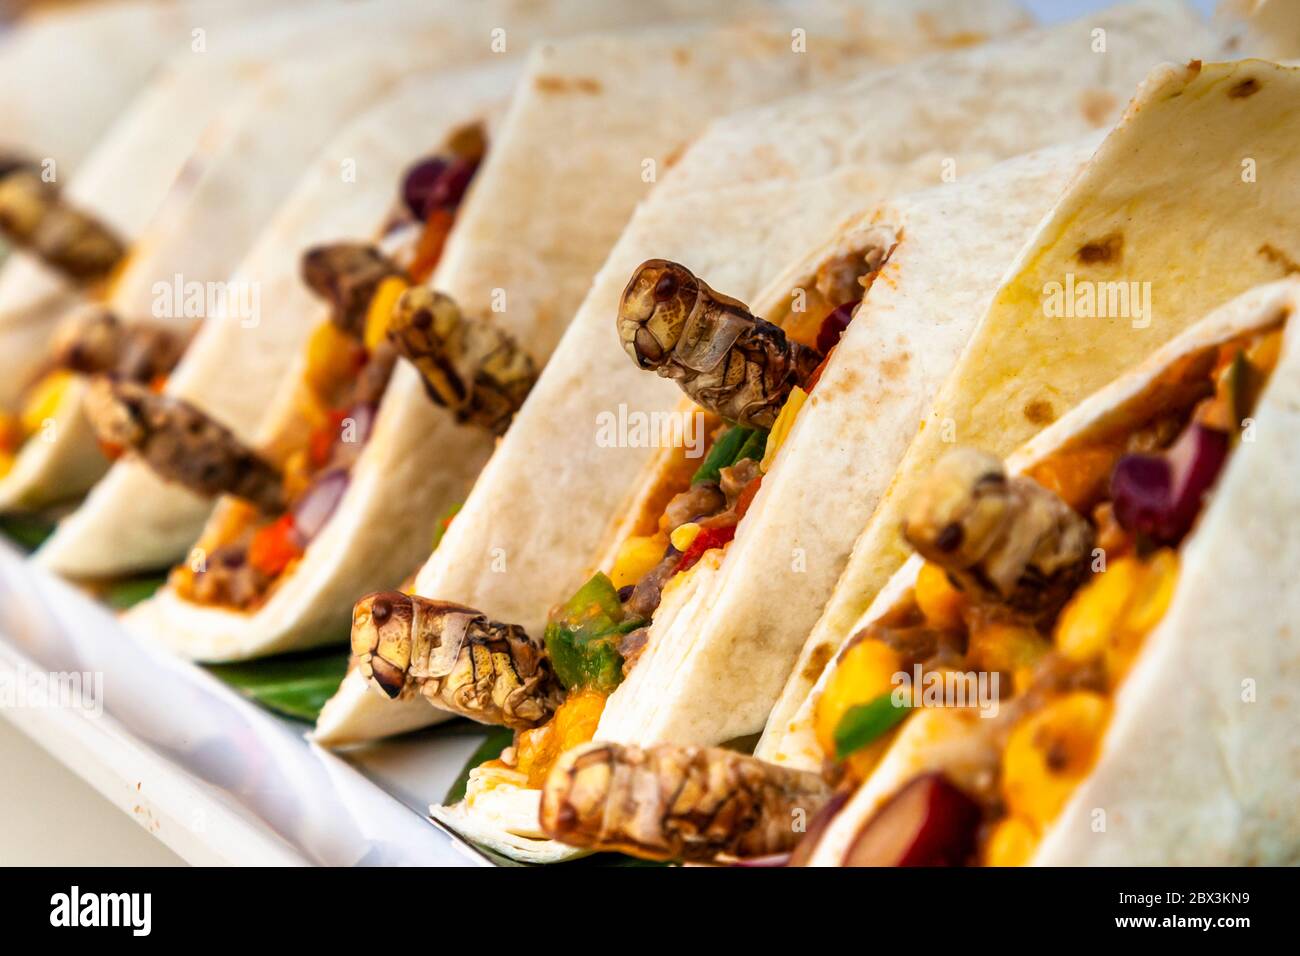 Locust wrap. Delicatessen made of Insects in Cologne, Germany Stock Photo